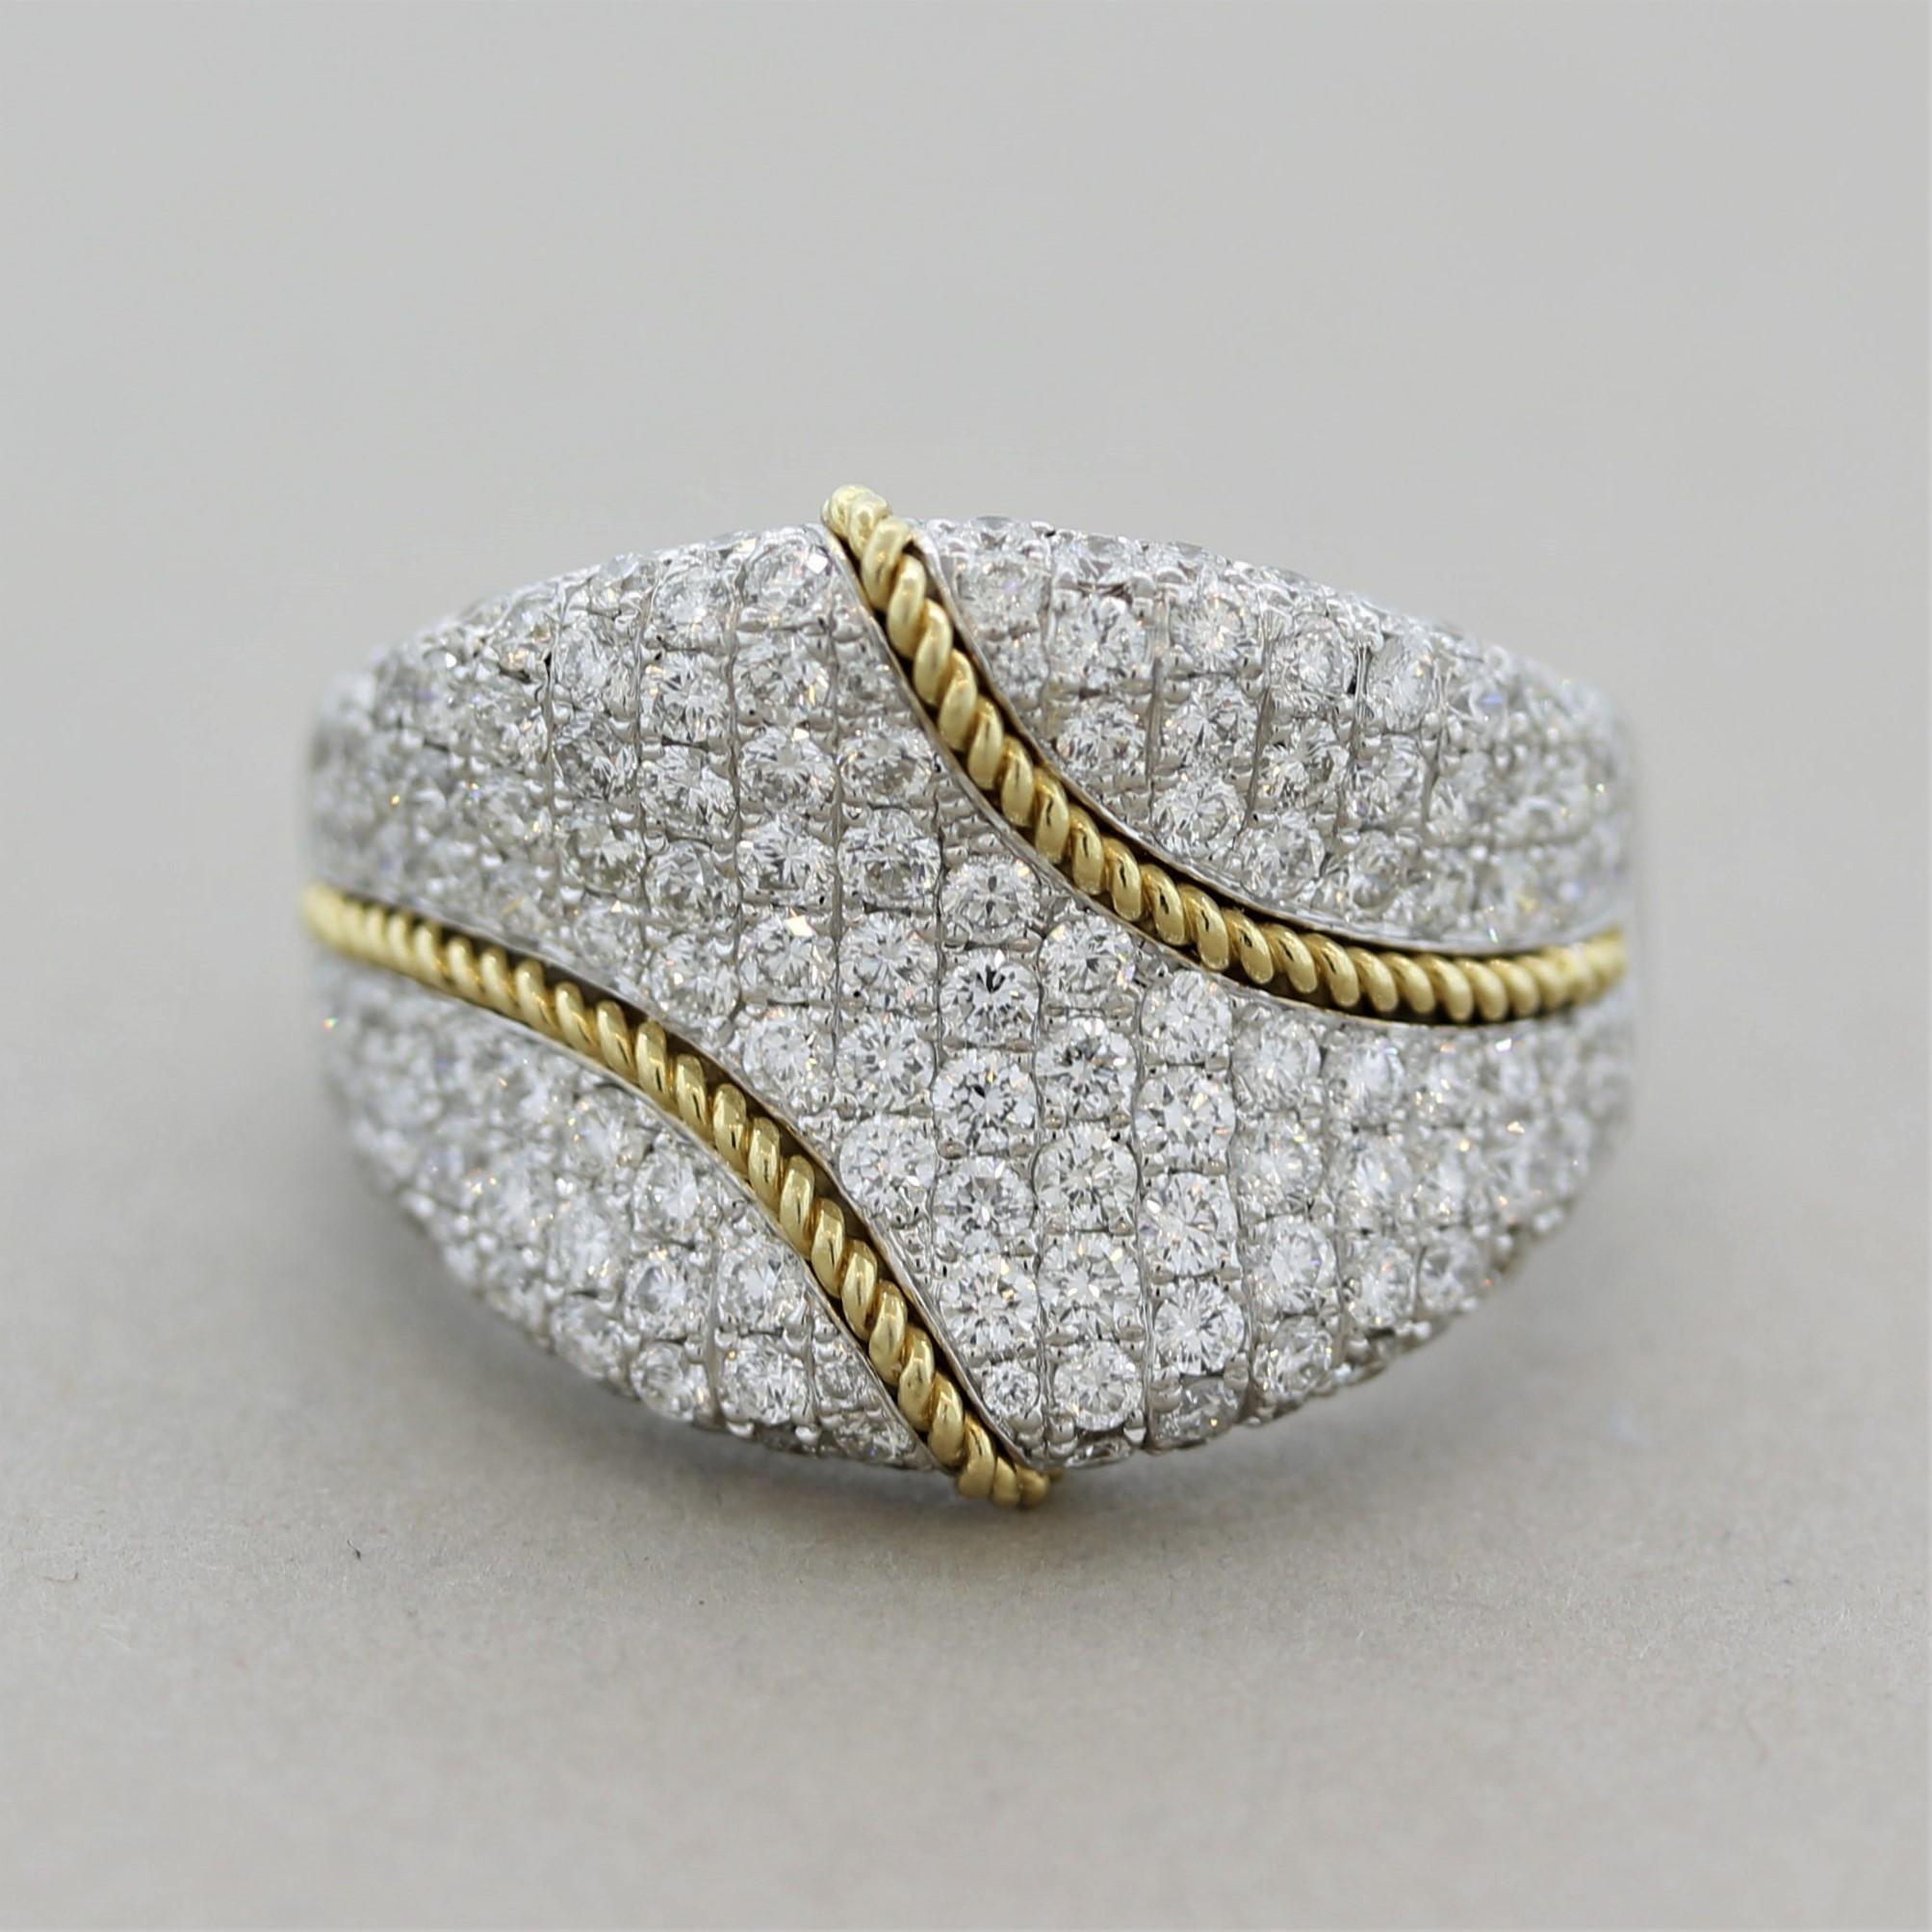 A stylish ring featuring 2.38 carats of fine round brilliant-cut diamonds. Over the blanket of bright white stones are two lines of braided yellow gold adding contrast and color to the piece. Made in 18k gold and ready to be worn!

Ring Size 6.50